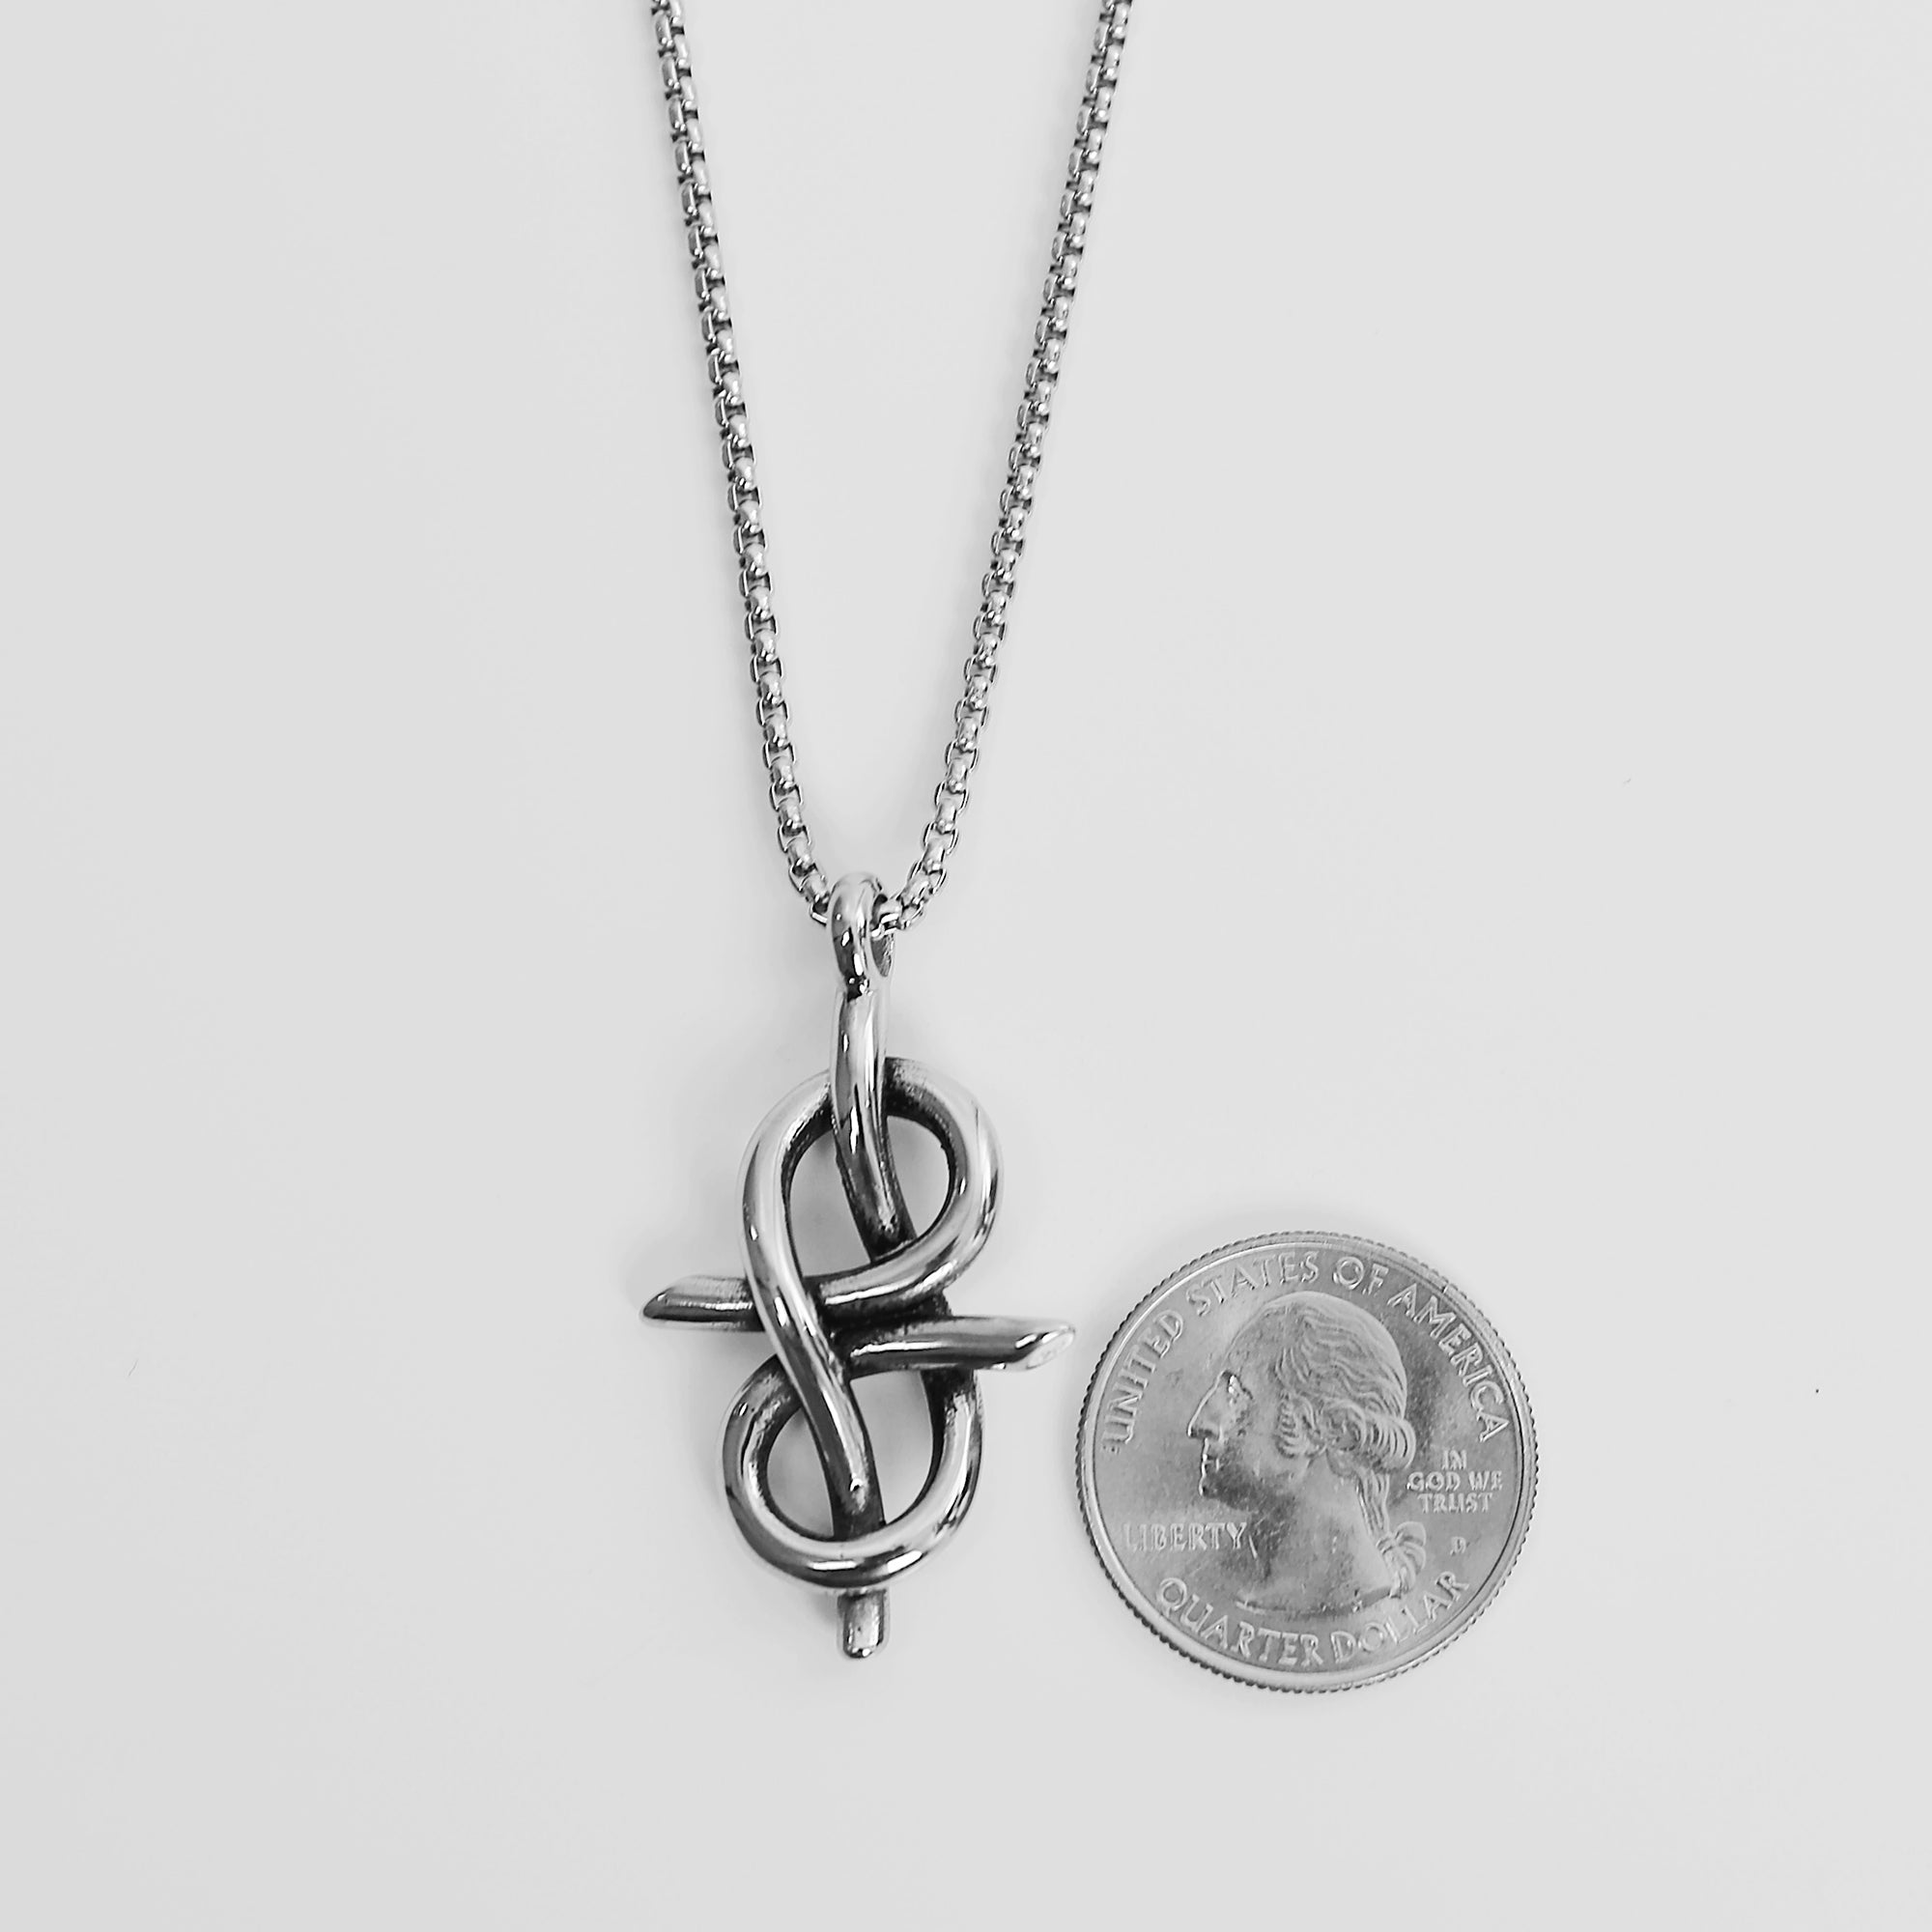 Nail Cross Necklace - Silver